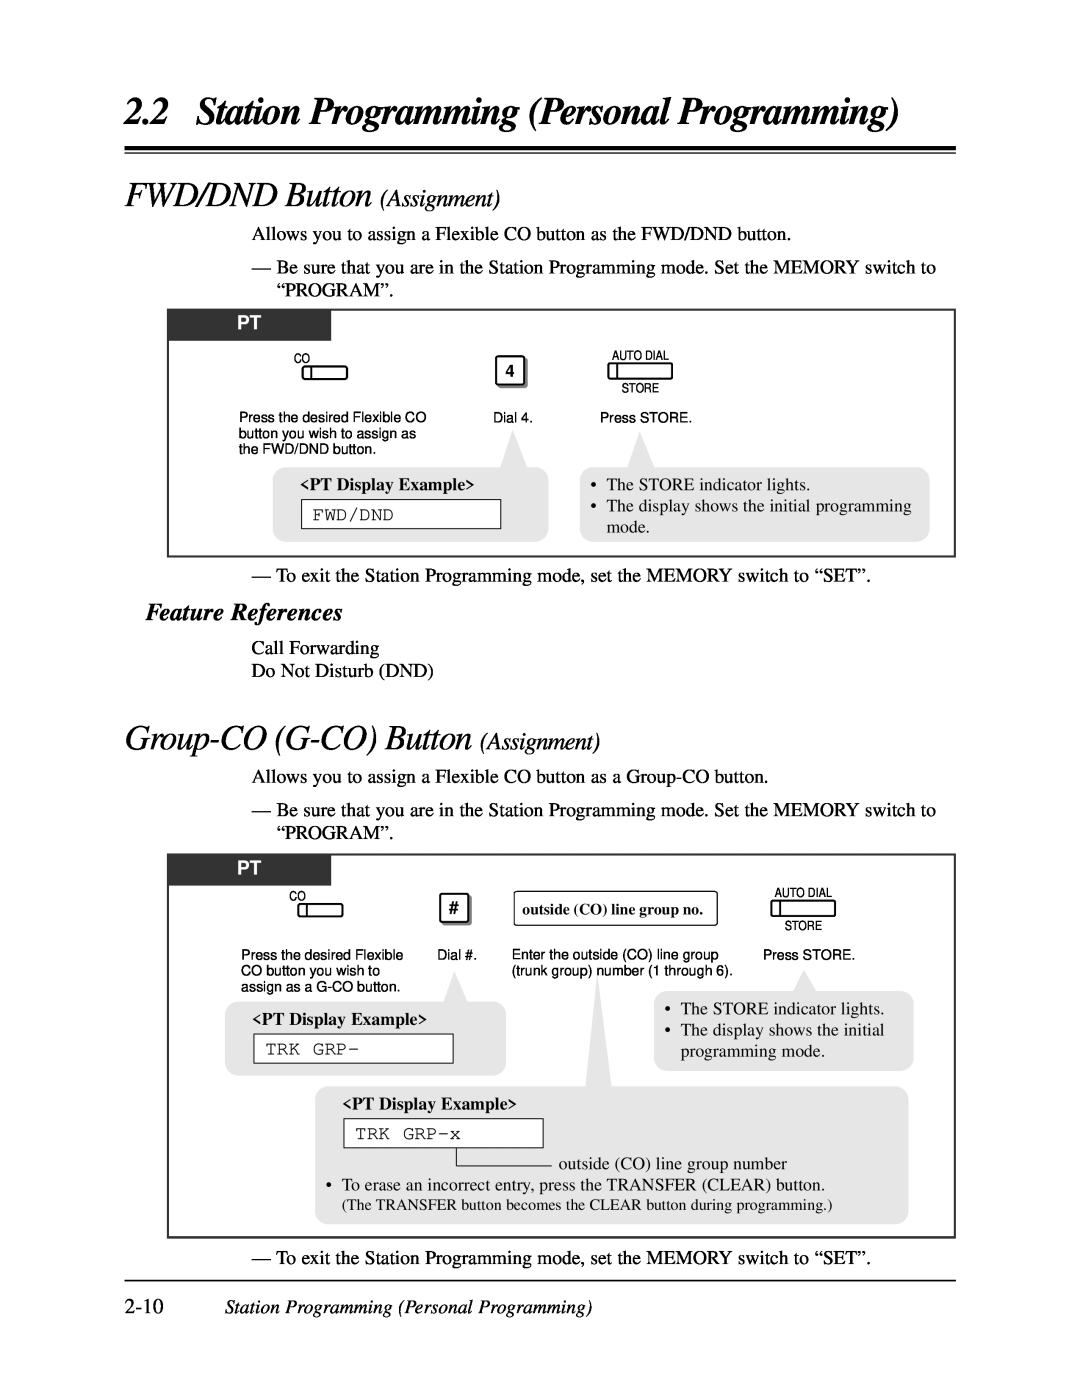 Panasonic KX-TA624 FWD/DND Button Assignment, Group-CO G-COButton Assignment, Station Programming Personal Programming 